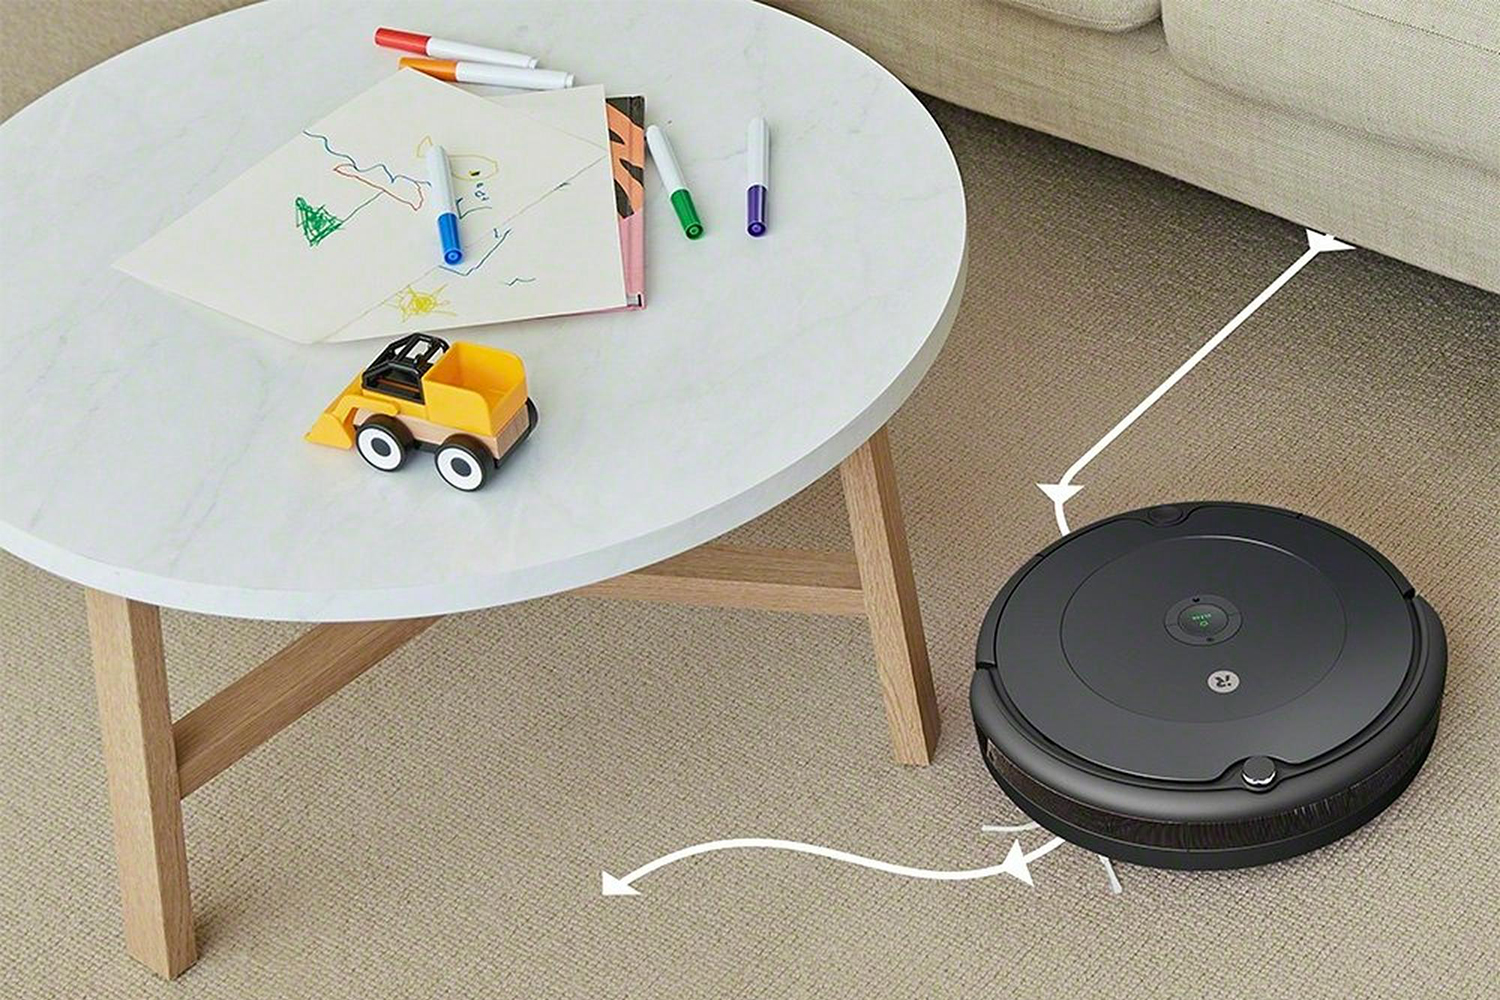 Stop What You're Doing and Buy This Roomba Robot Vacuum Now | Digital Trends